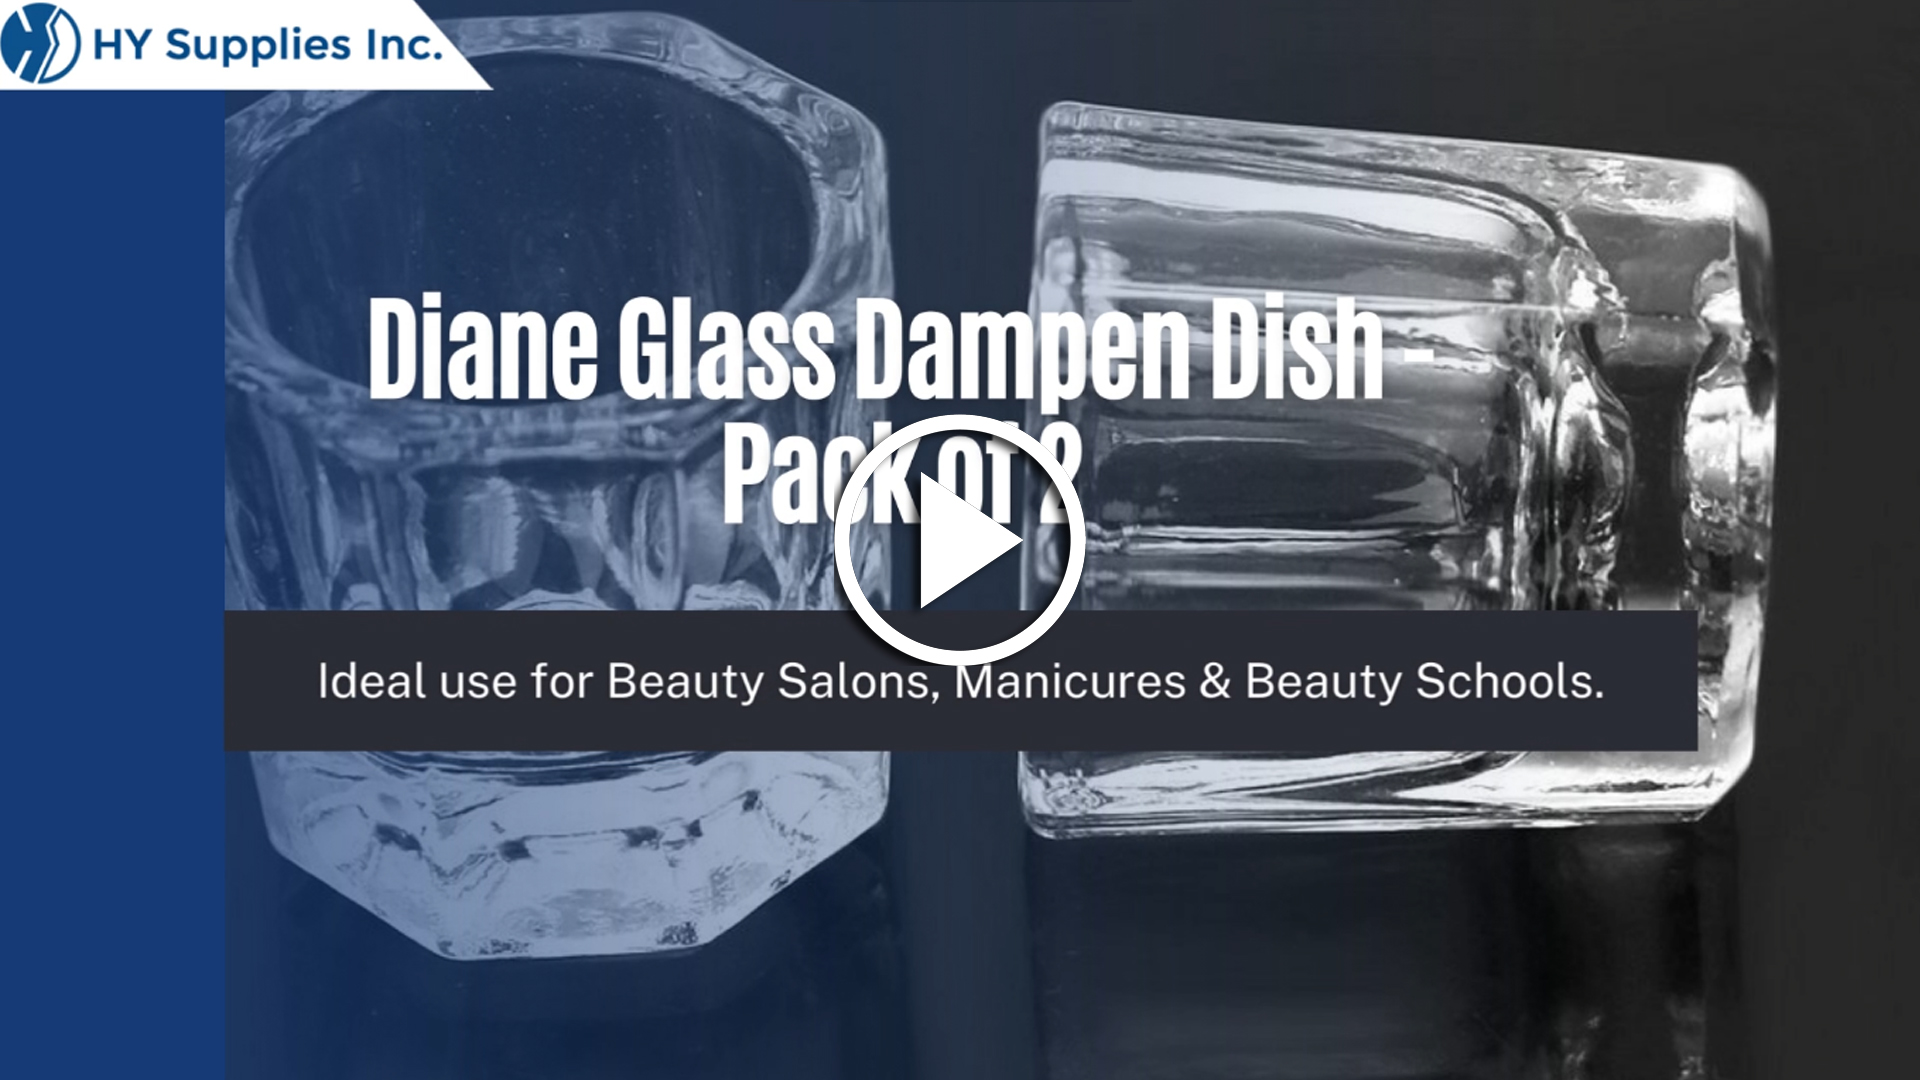 Diane Glass Dampen Dish - Pack of 2